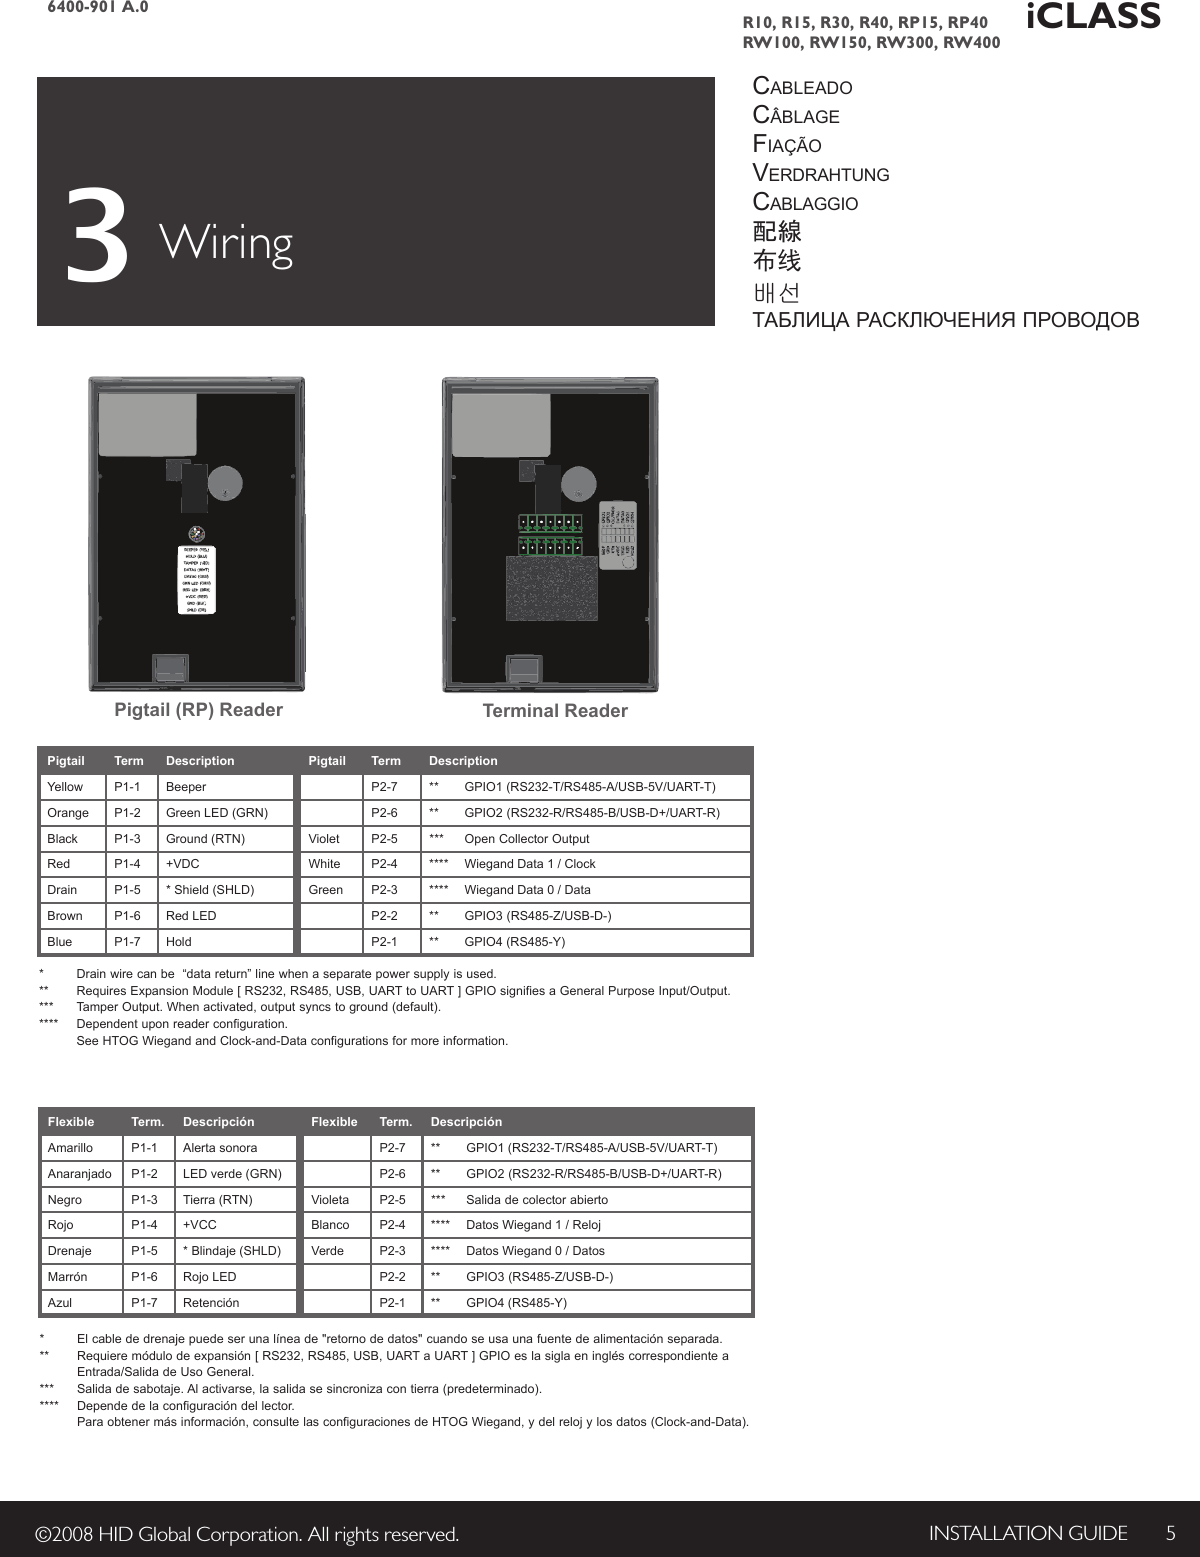 INSTALLATION GUIDE 5©2008 HID Global Corporation. All rights reserved.6400-901 A.0R10, R15, R30, R40, RP15, RP40   iCLASSRW100, RW150, RW300, RW400 Wiringca b l e a d ocâb l a g efi a ç ã oVe r d r a h t u n gca b l a g g i o配線布线배선ТАБЛИЦА рАсКЛЮЧЕНИЯ ПрОВОДОВTerminal ReaderPigtail (RP) Reader    Pigtail Term Description Pigtail Term Description                                          Flexible Term. Descripción Flexible Term. Descripción                                      3